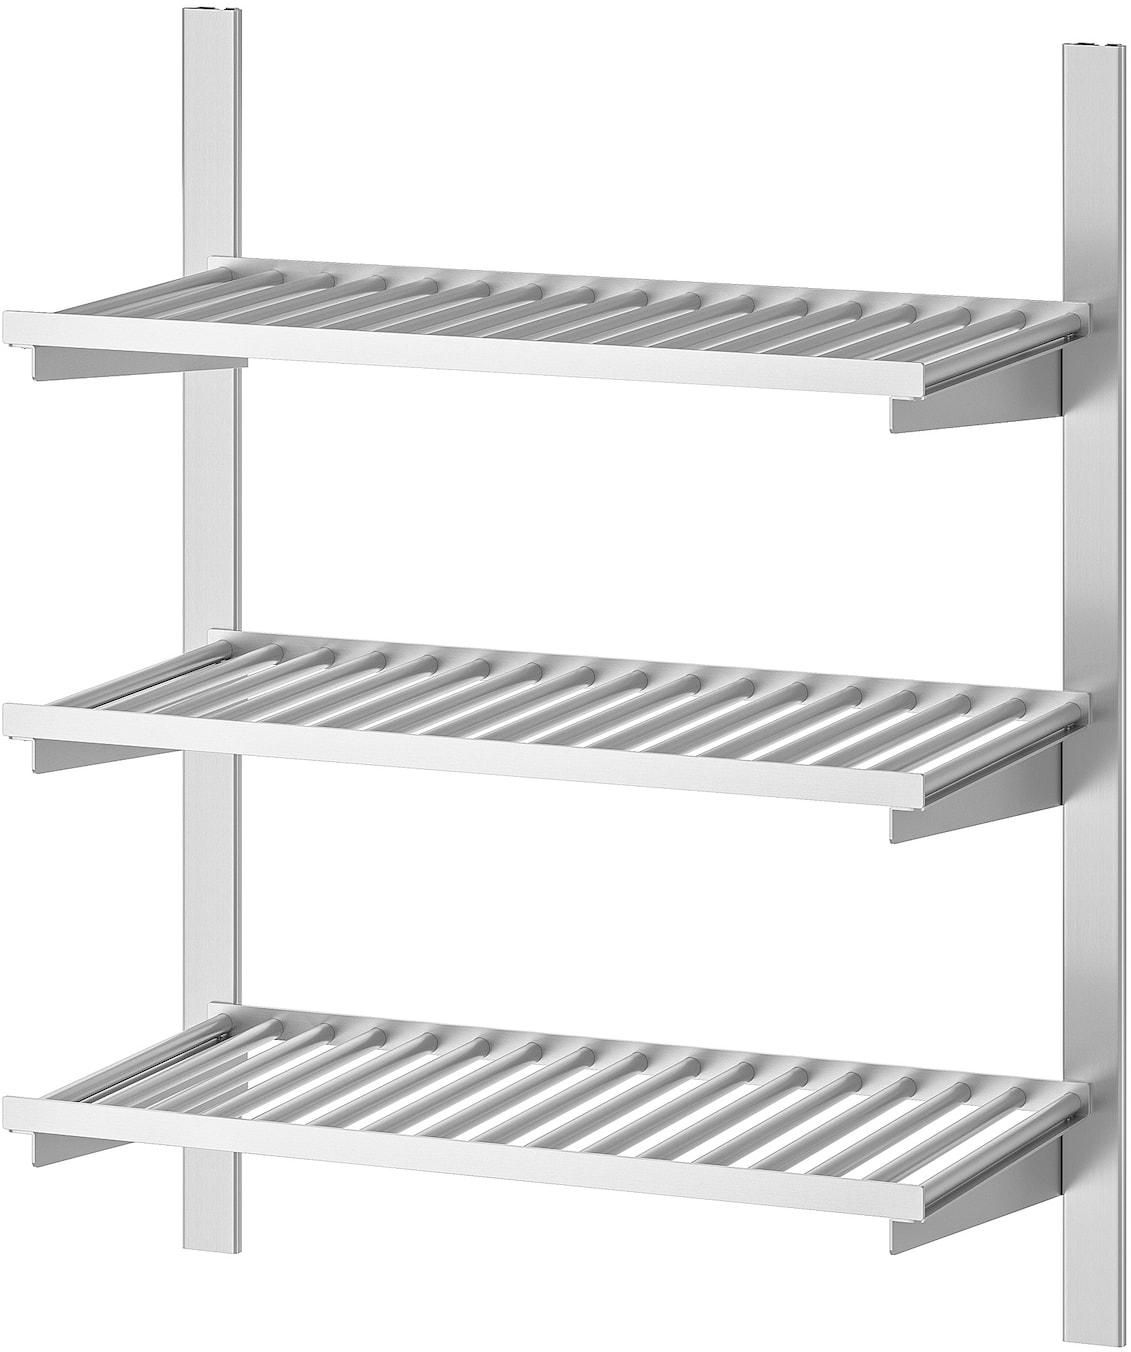 KUNGSFORS Suspension rail with shelves - stainless steel